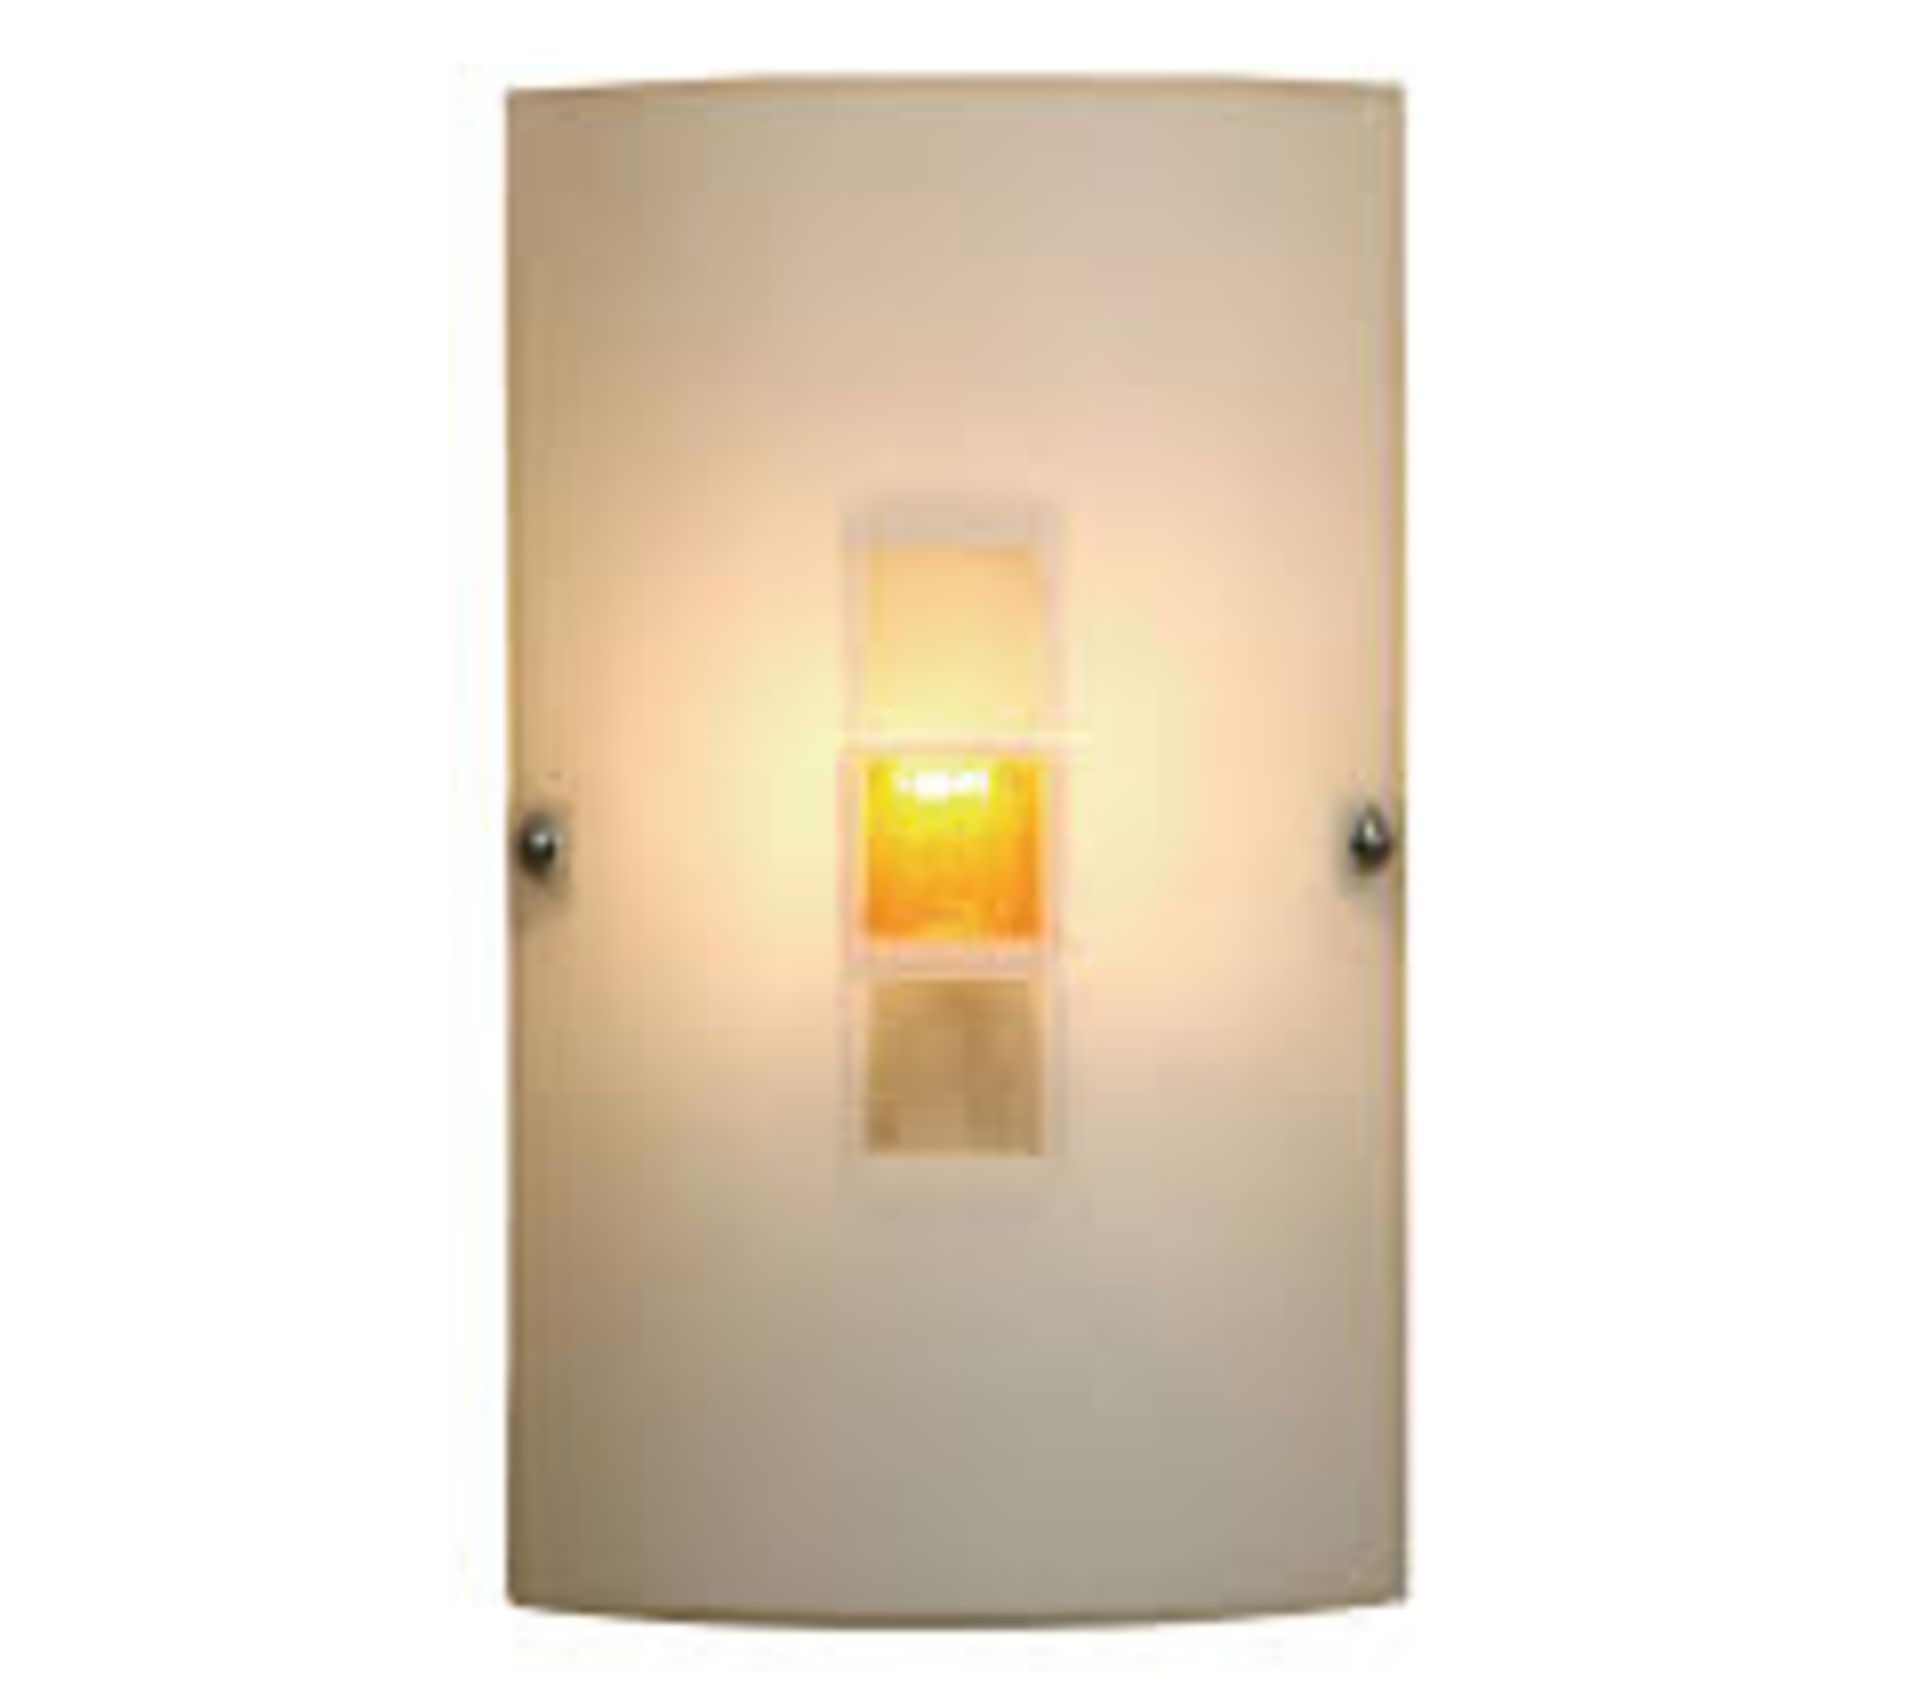 Boxed 1 Light Muro Open Dual Wall Light RRP £25 Each (16543) (Pictures Are For Illustration Purposes